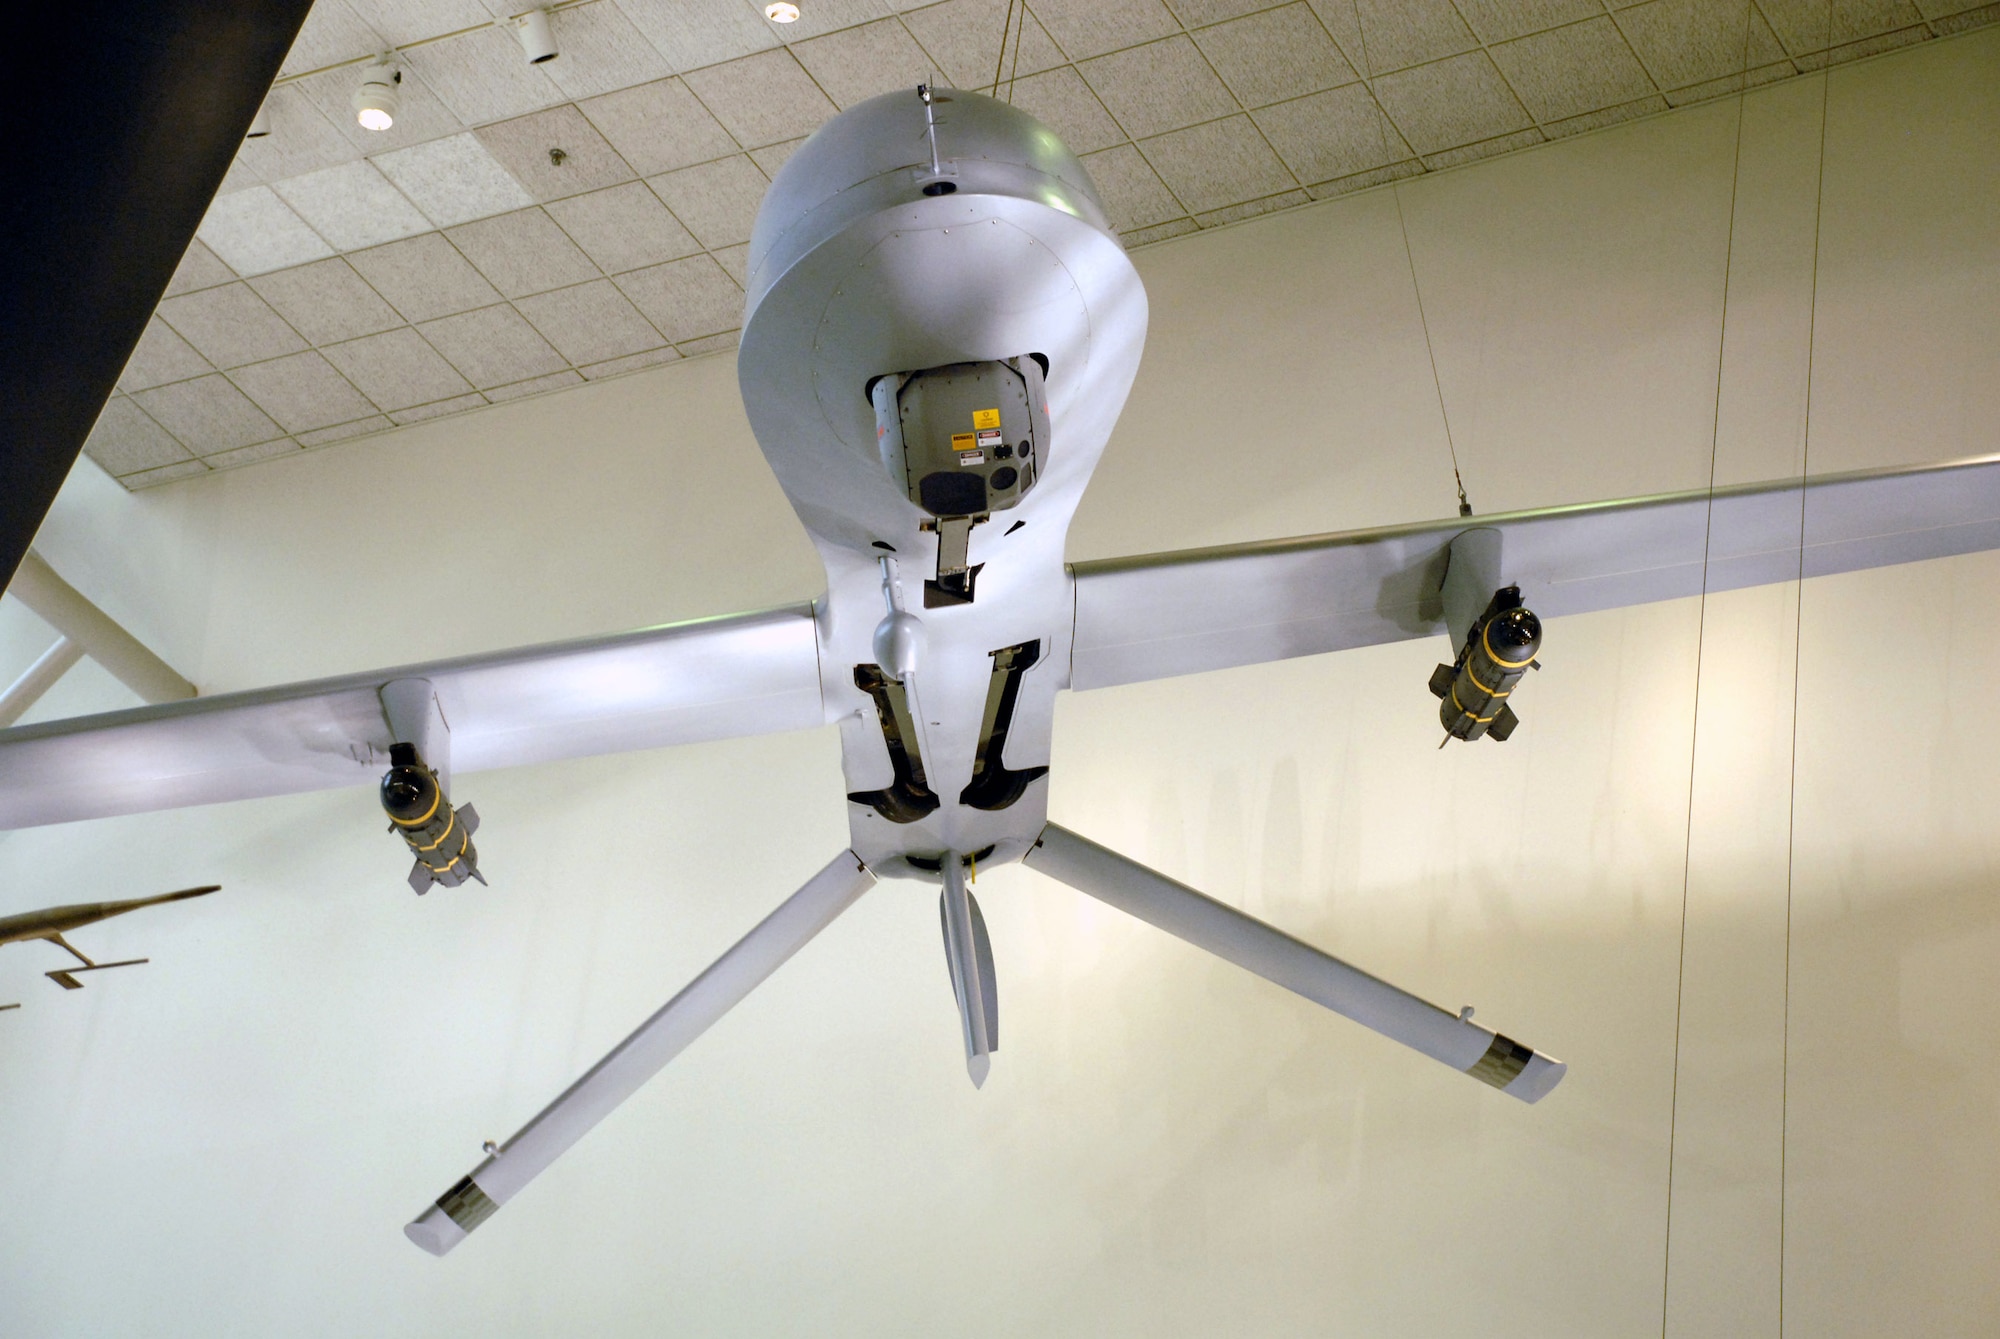 An MQ-1L Predator A hangs in the Smithsonian Institution's National Air and Space Museum in a new exhibit of military unmanned aerial vehicles.  The exhibit, which opened to the public April 24, includes six UAVs from all four services and will be on display for the next 10 years.  This particular Predator was the first MQ-1L to fire a missile in combat and flew 196 combat missions before being retired. (U.S. Air Force photo/Staff Sgt. J.G. Buzanowski) 